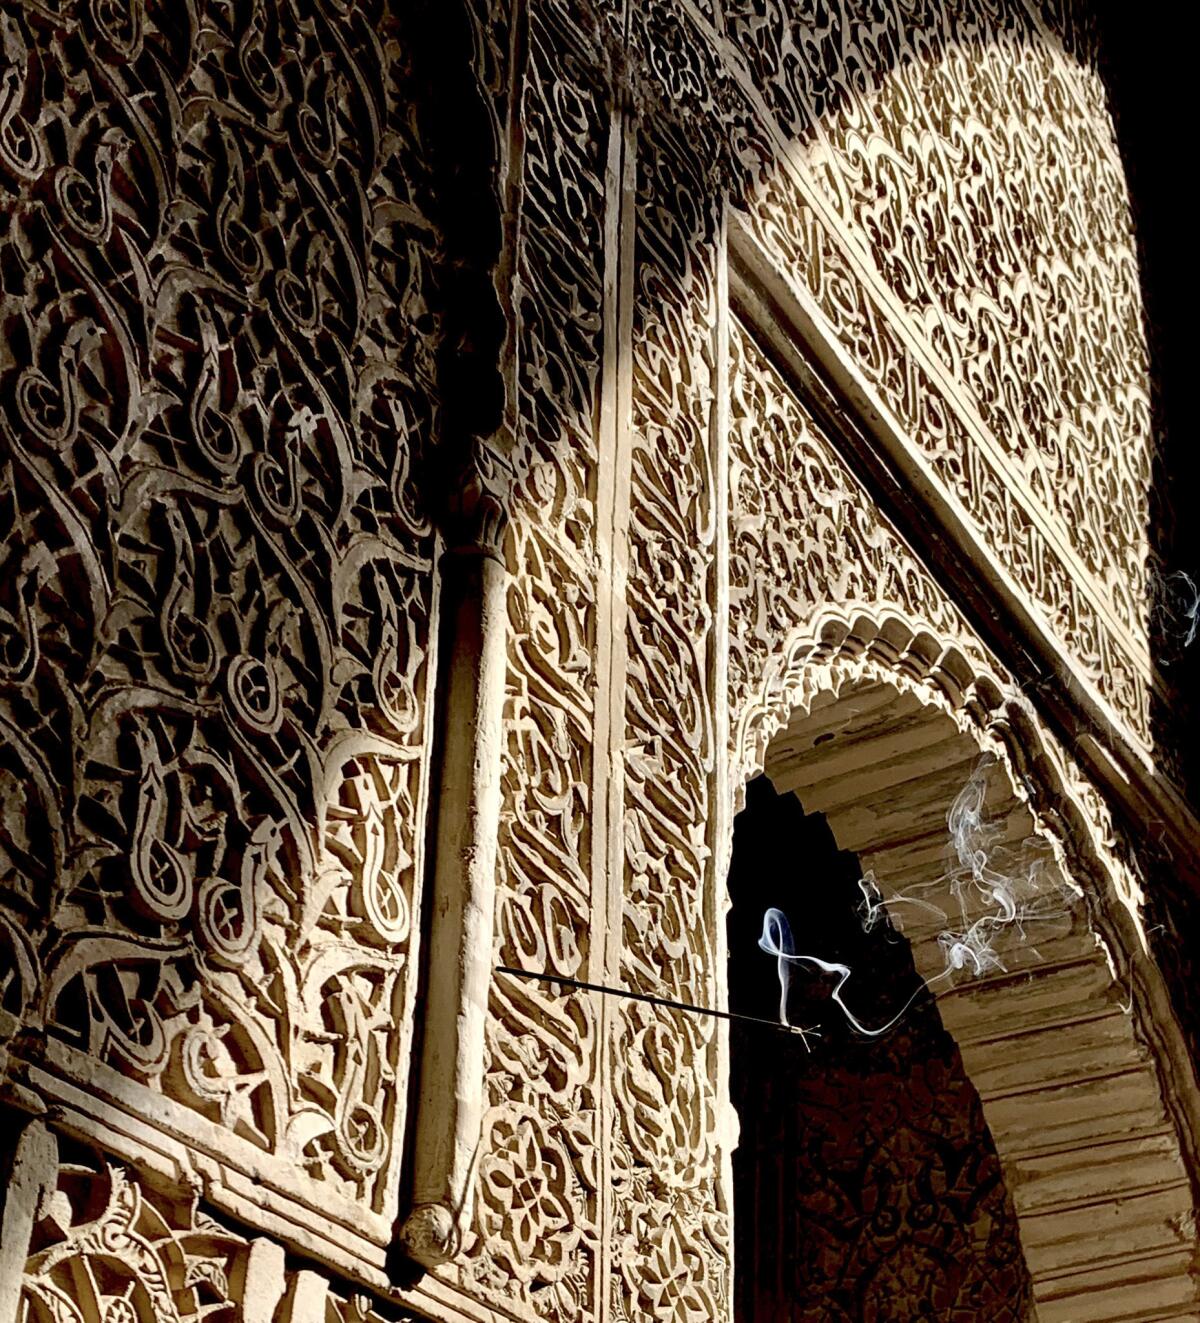 A stick of incense burns from one of the sumptuously decorated stucco walls at Bou Inania Medersa, a residential religious school built in the 14th century in the old walled city in Fez.